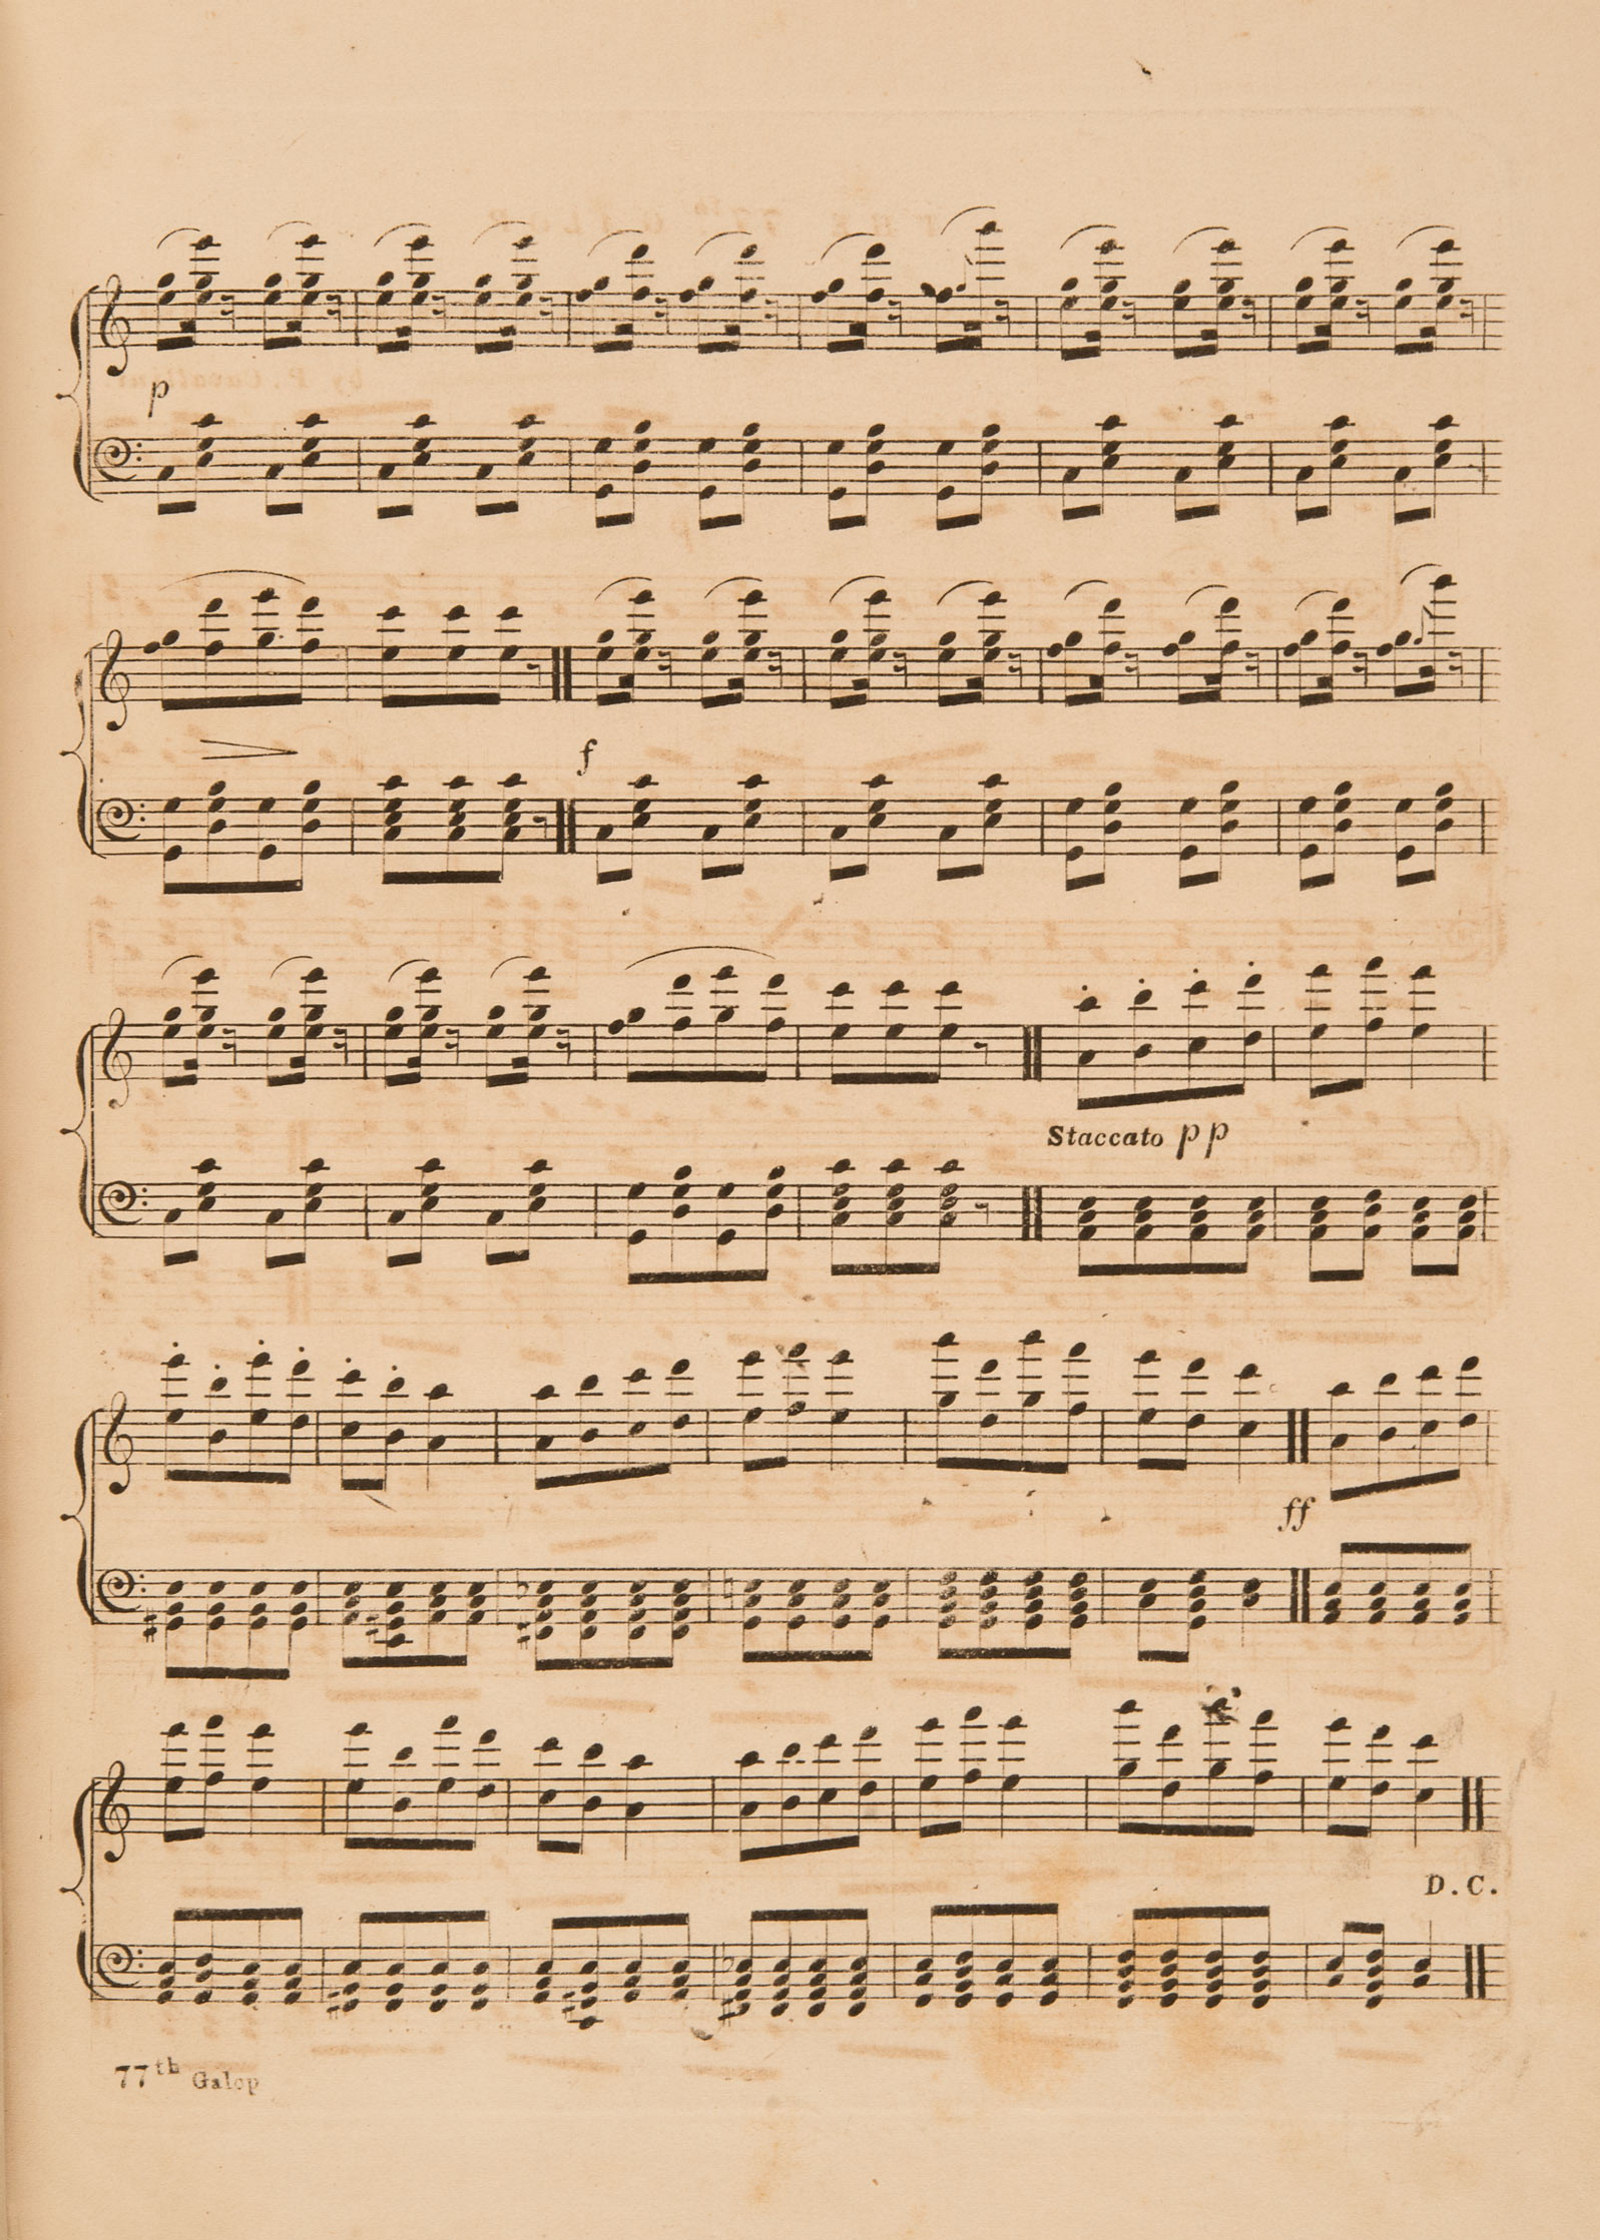 Sheet music, 'The 77th Galop',  by P. Cavallini, page 2, published 1858